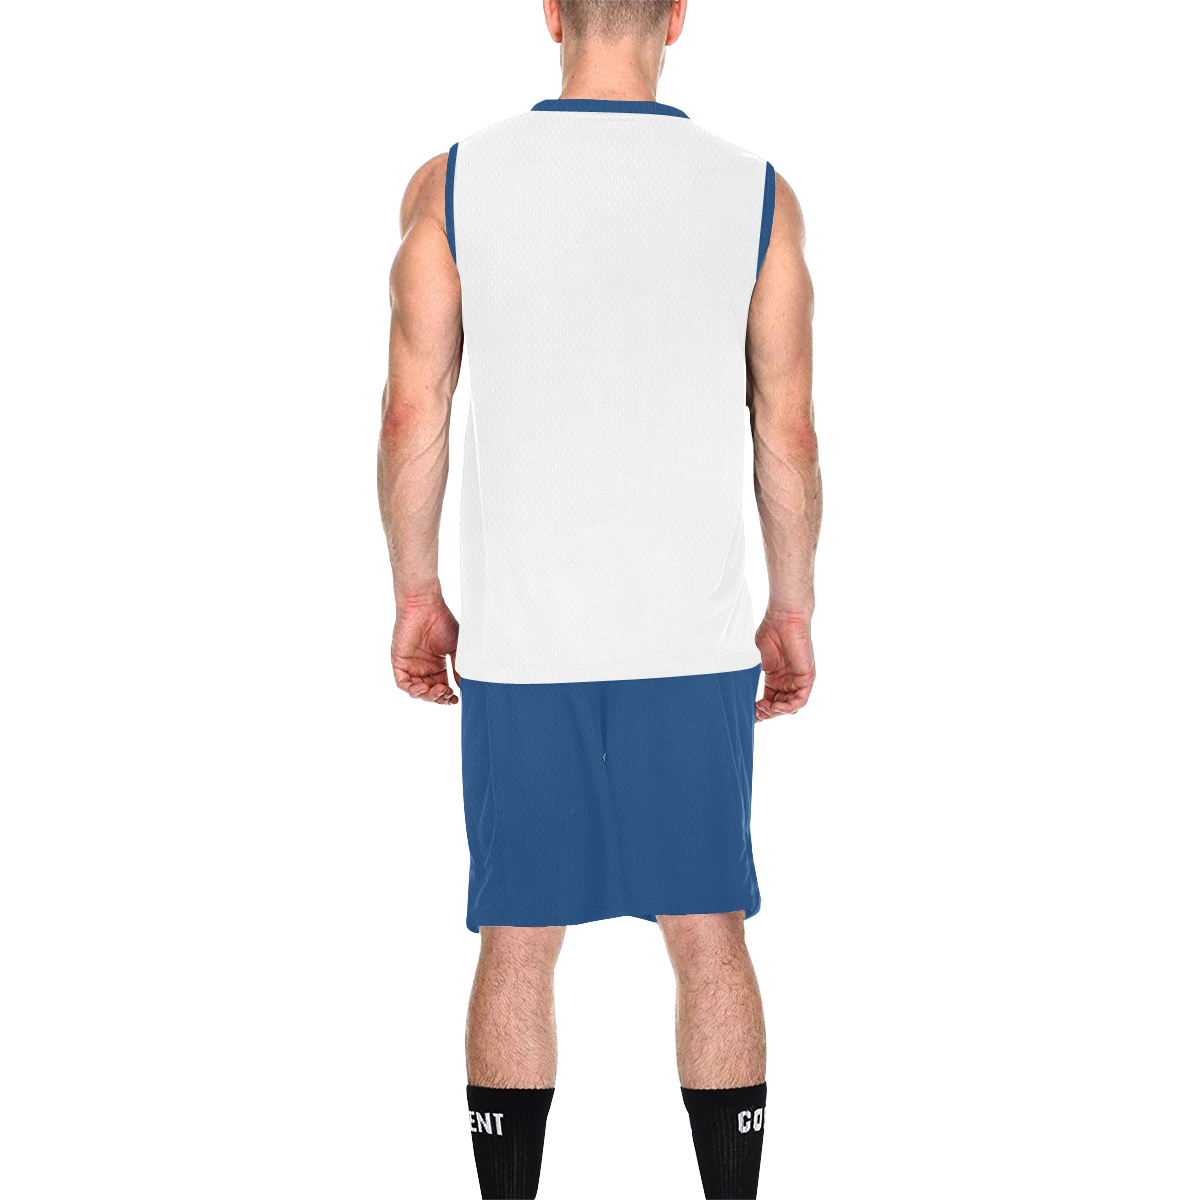 Basketball And Basketball Hoop Cerulean Blue and White All Over Print Basketball Uniform